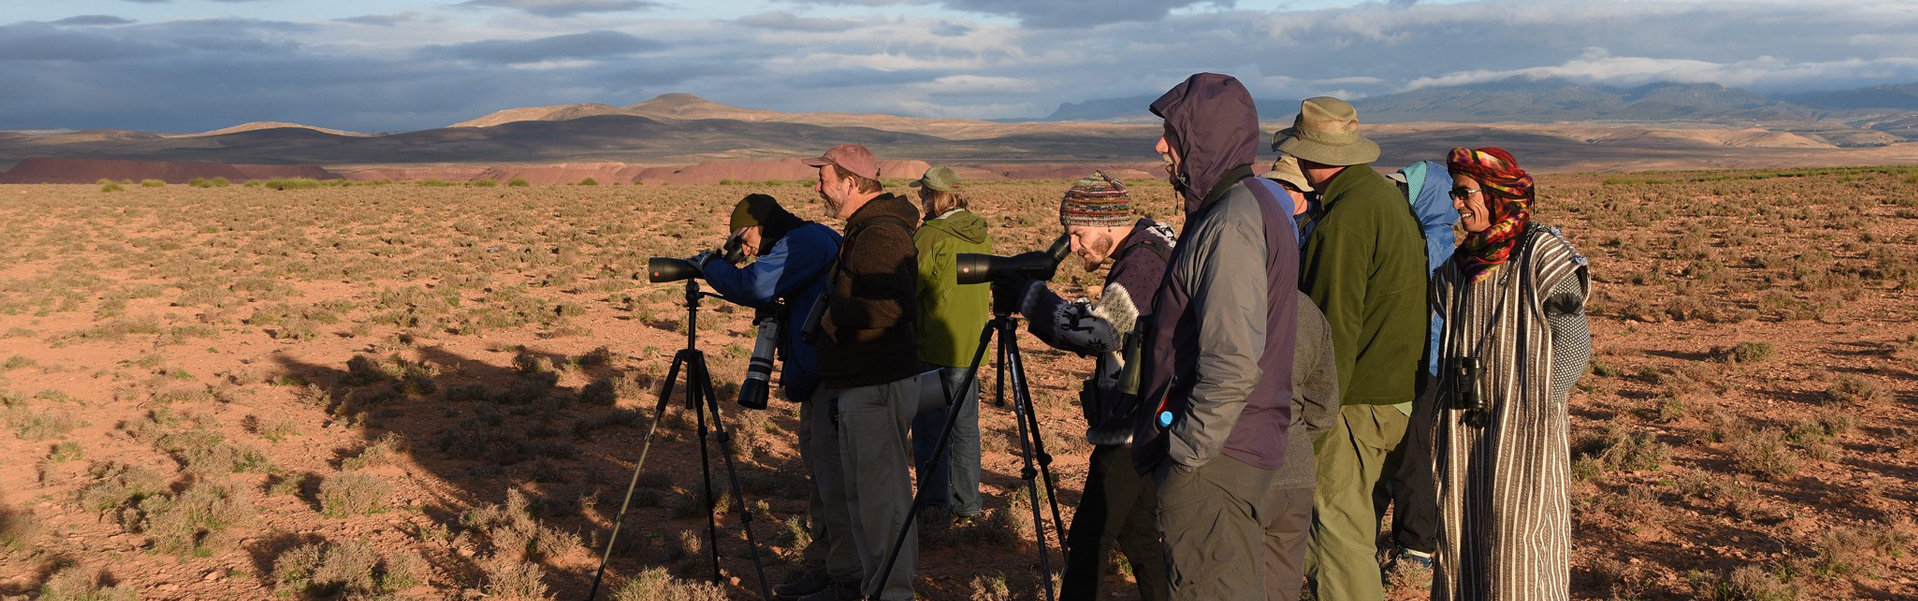 Sterling Birds Tour in Morocco (photo credit: Dan Brown, all rights reserved)